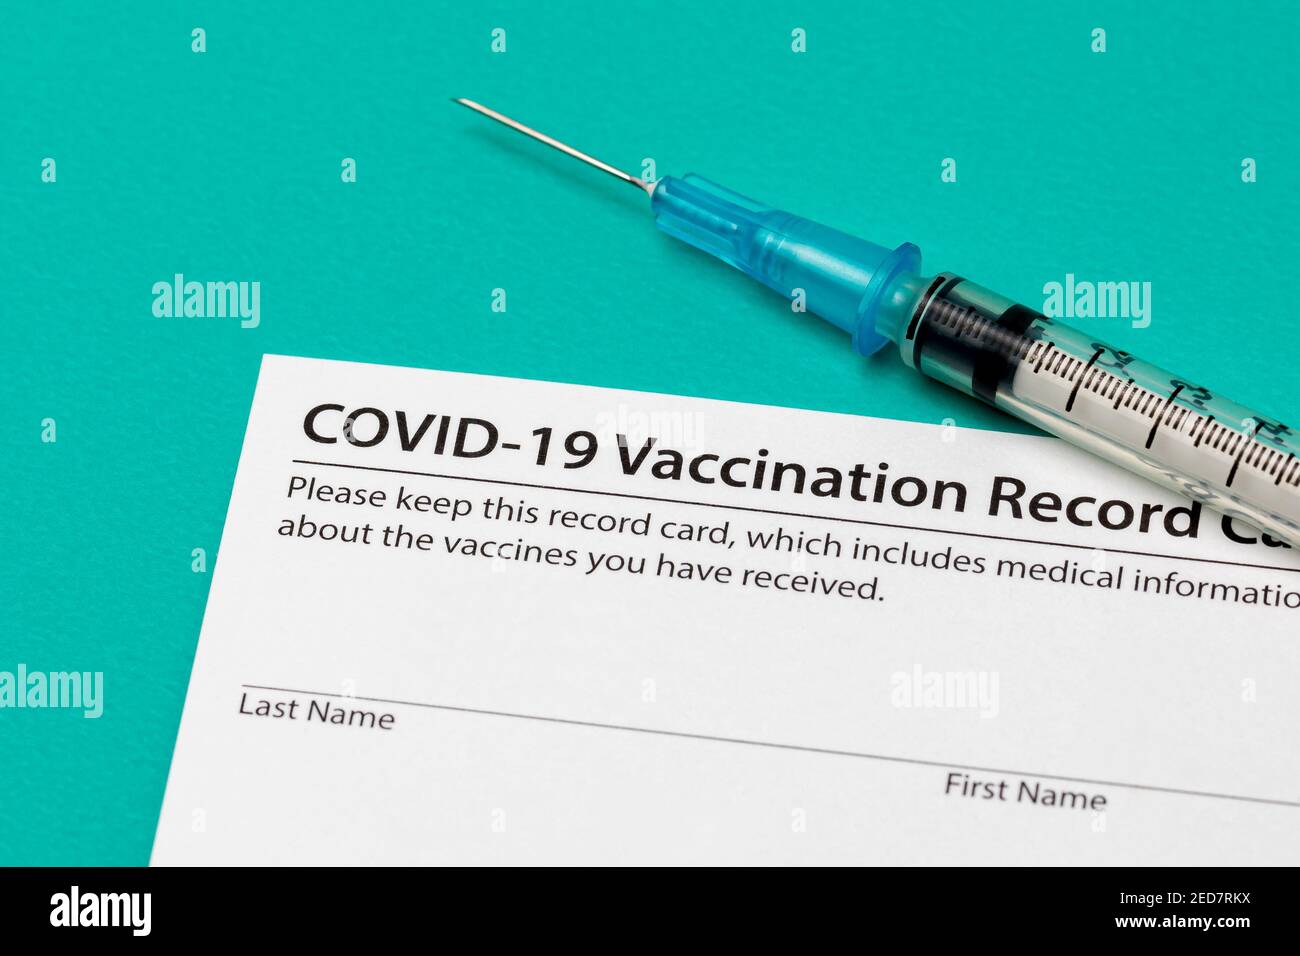 Covid-19 coronavirus vaccination record card with syringe and needle. Concept of vaccination, herd immunity and pandemic healthcare. Stock Photo